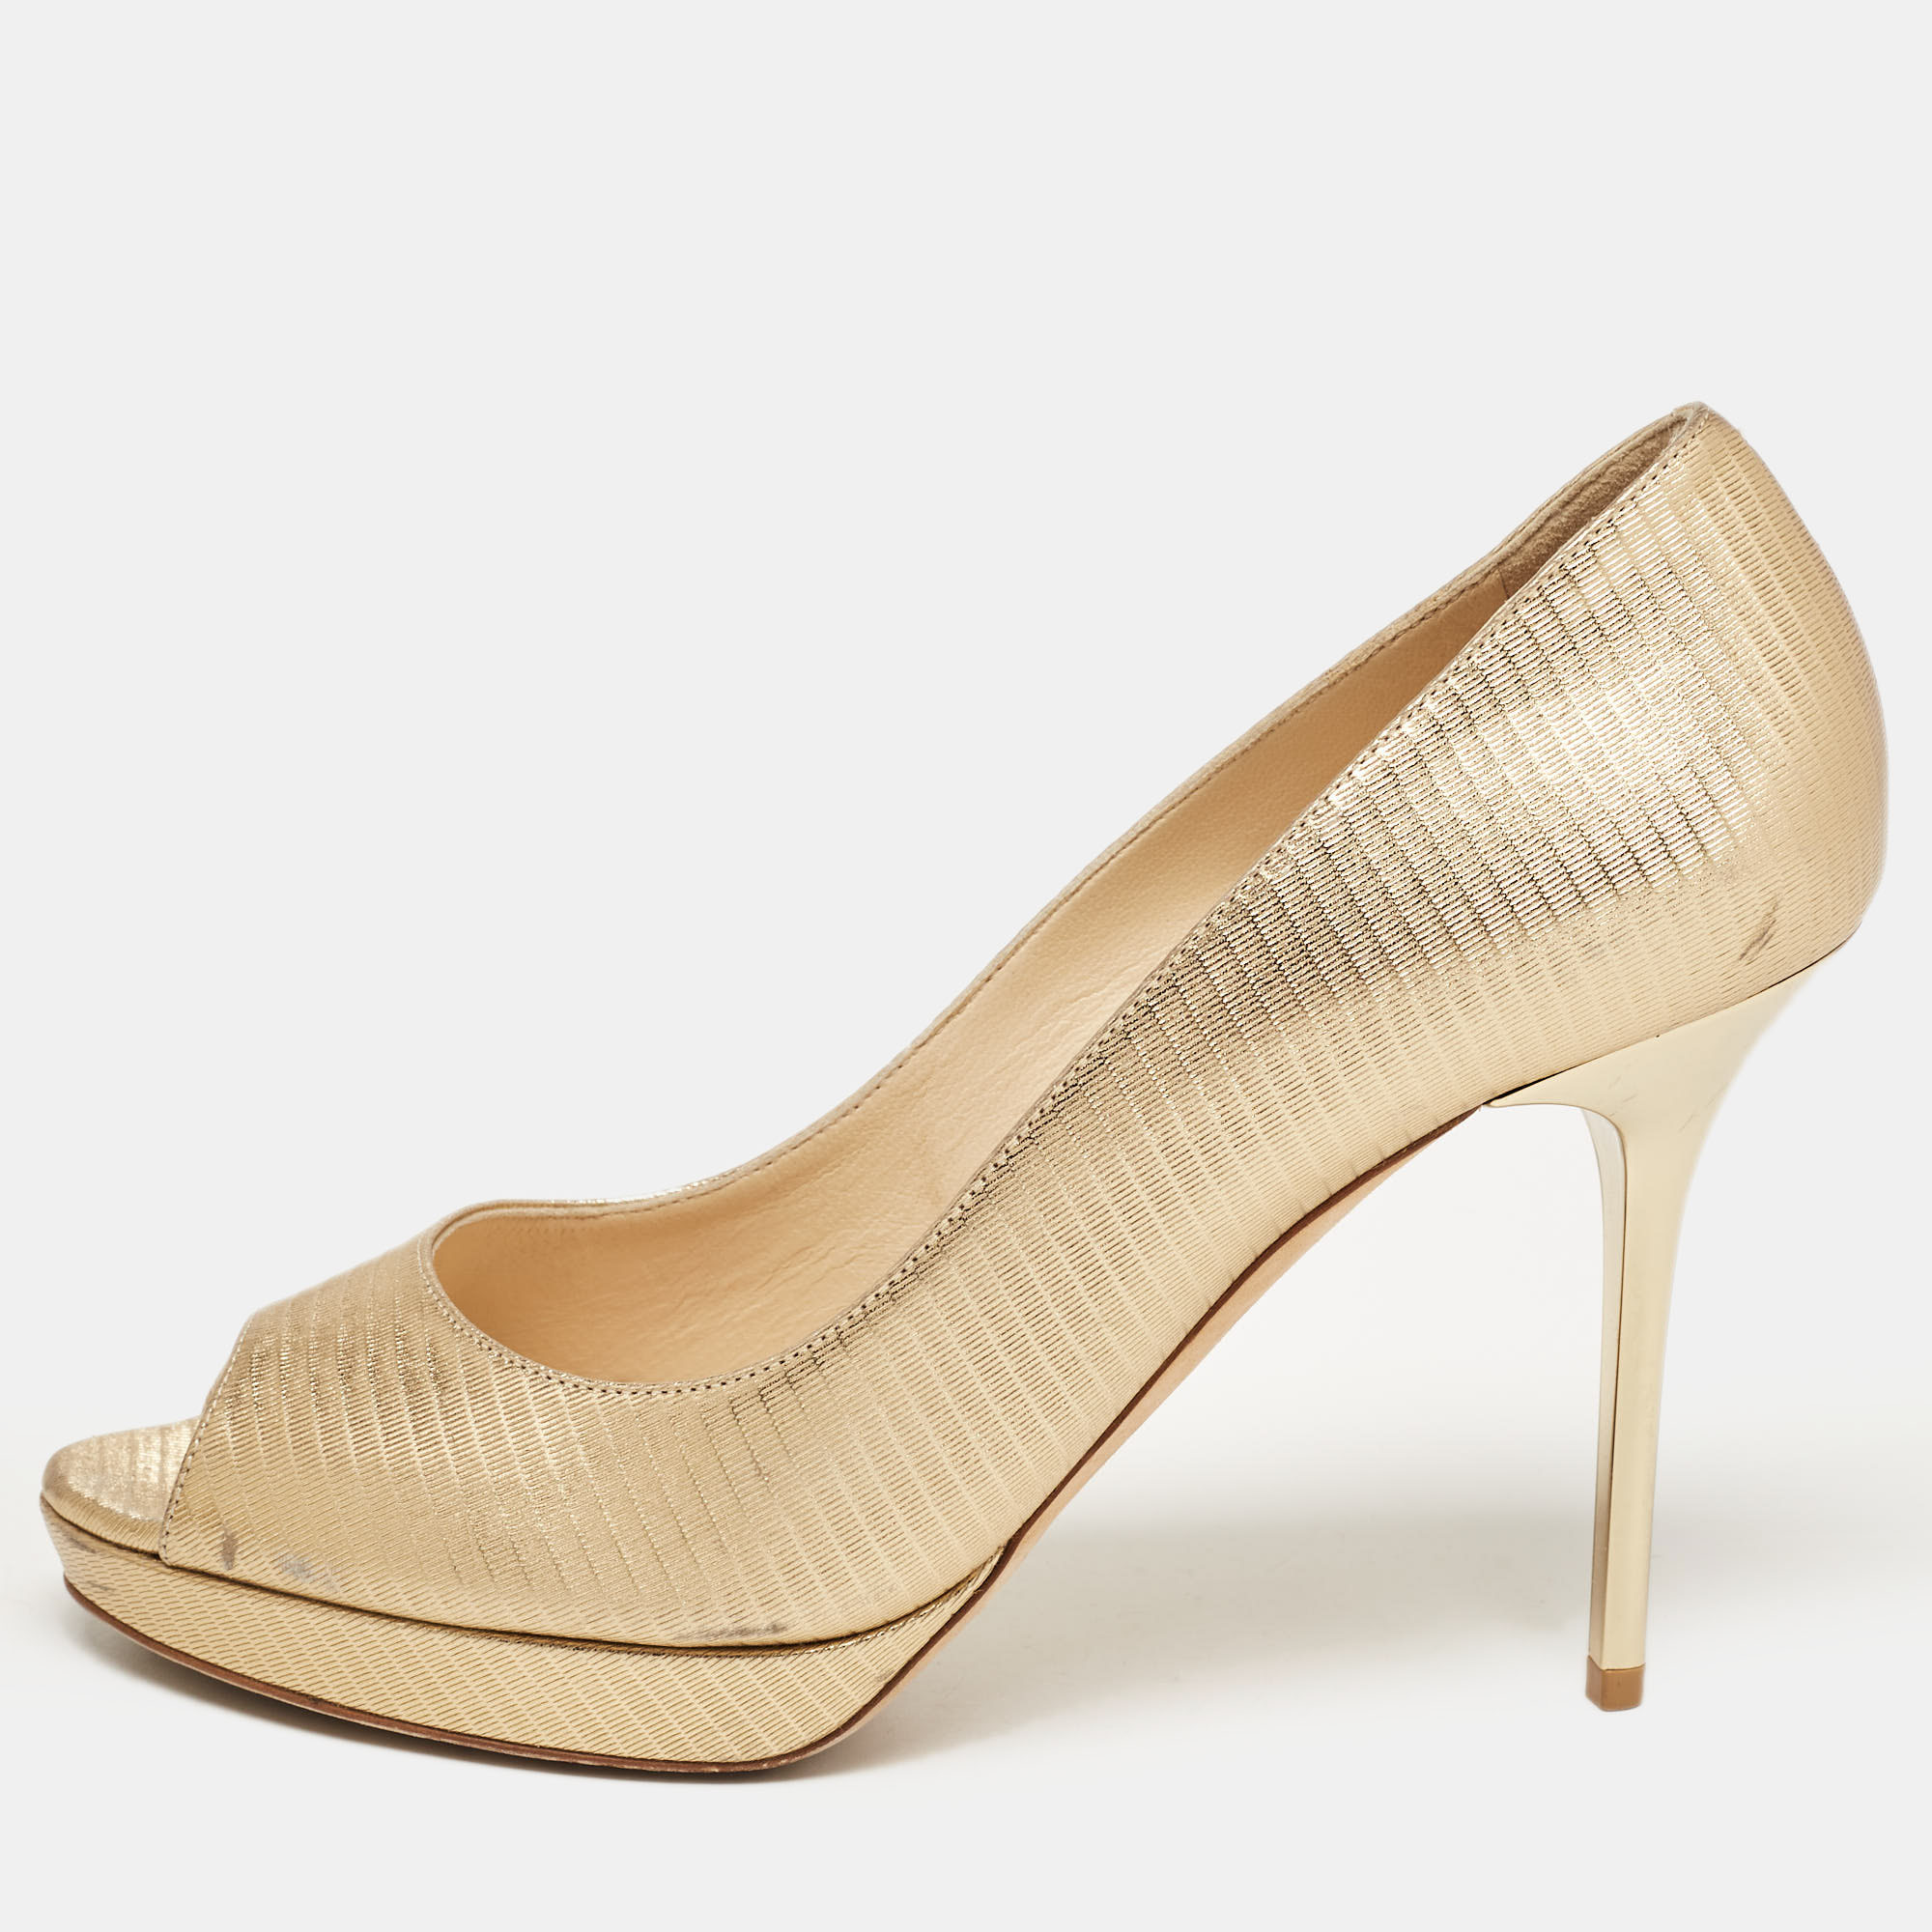 Pre-owned Jimmy Choo Gold Textured Leather Luna Pumps Size 38.5